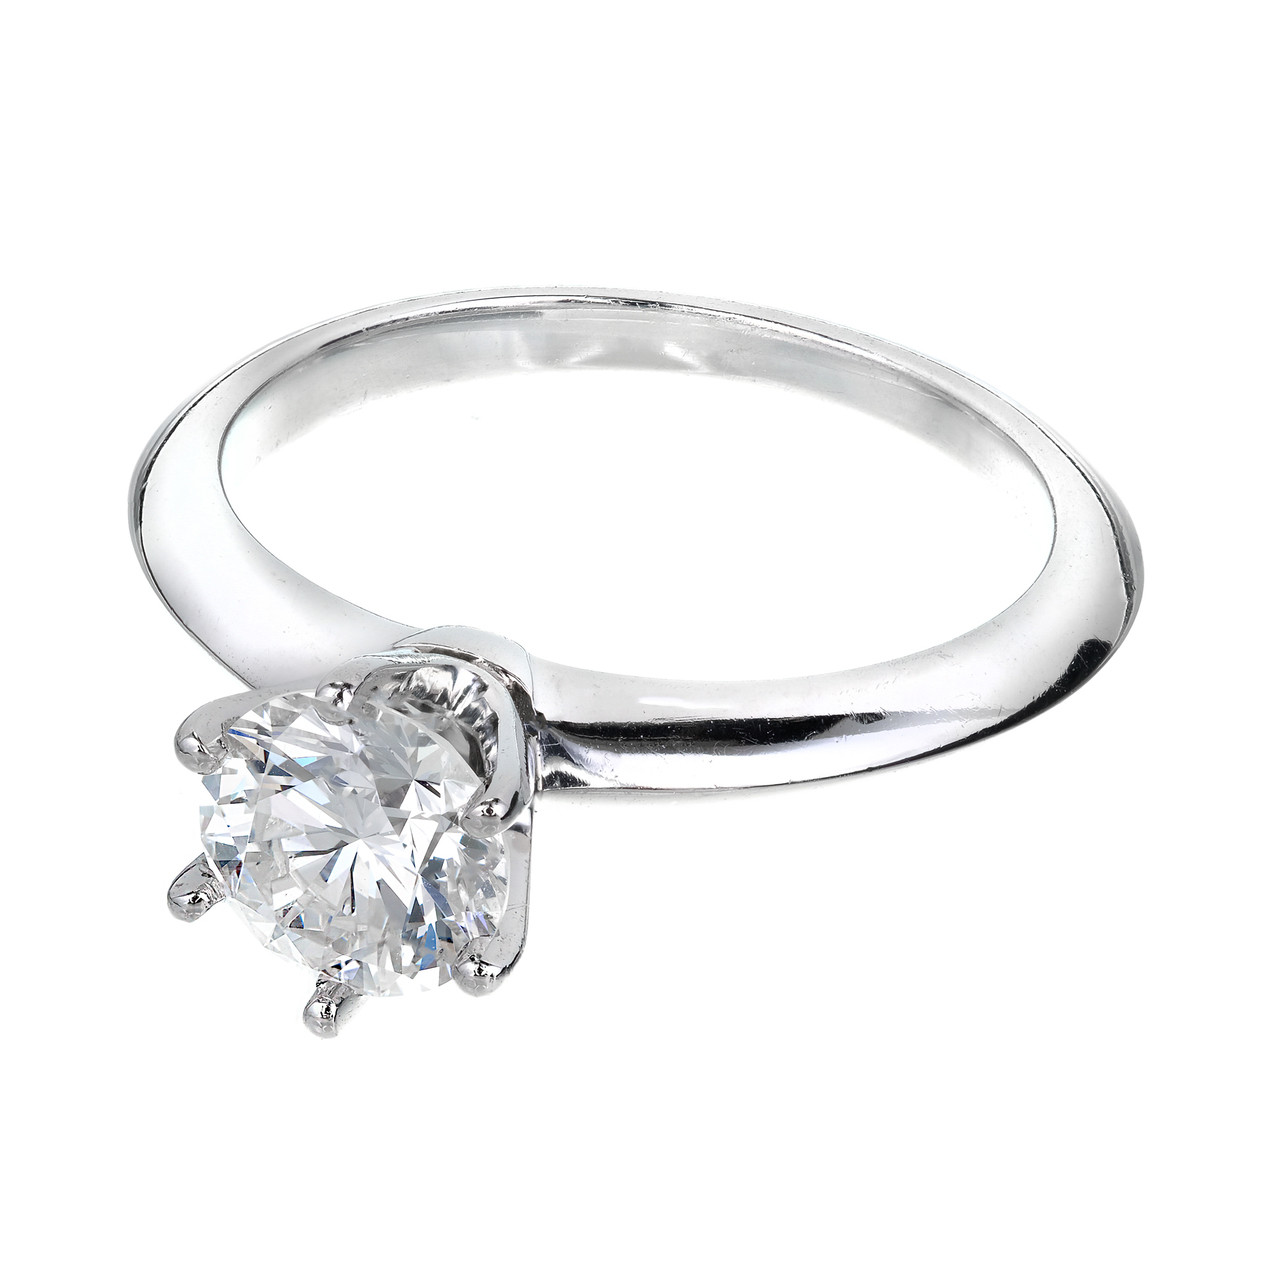 Sold at Auction: TIFFANY Platinum Engagement Ring. CERTIFICATE